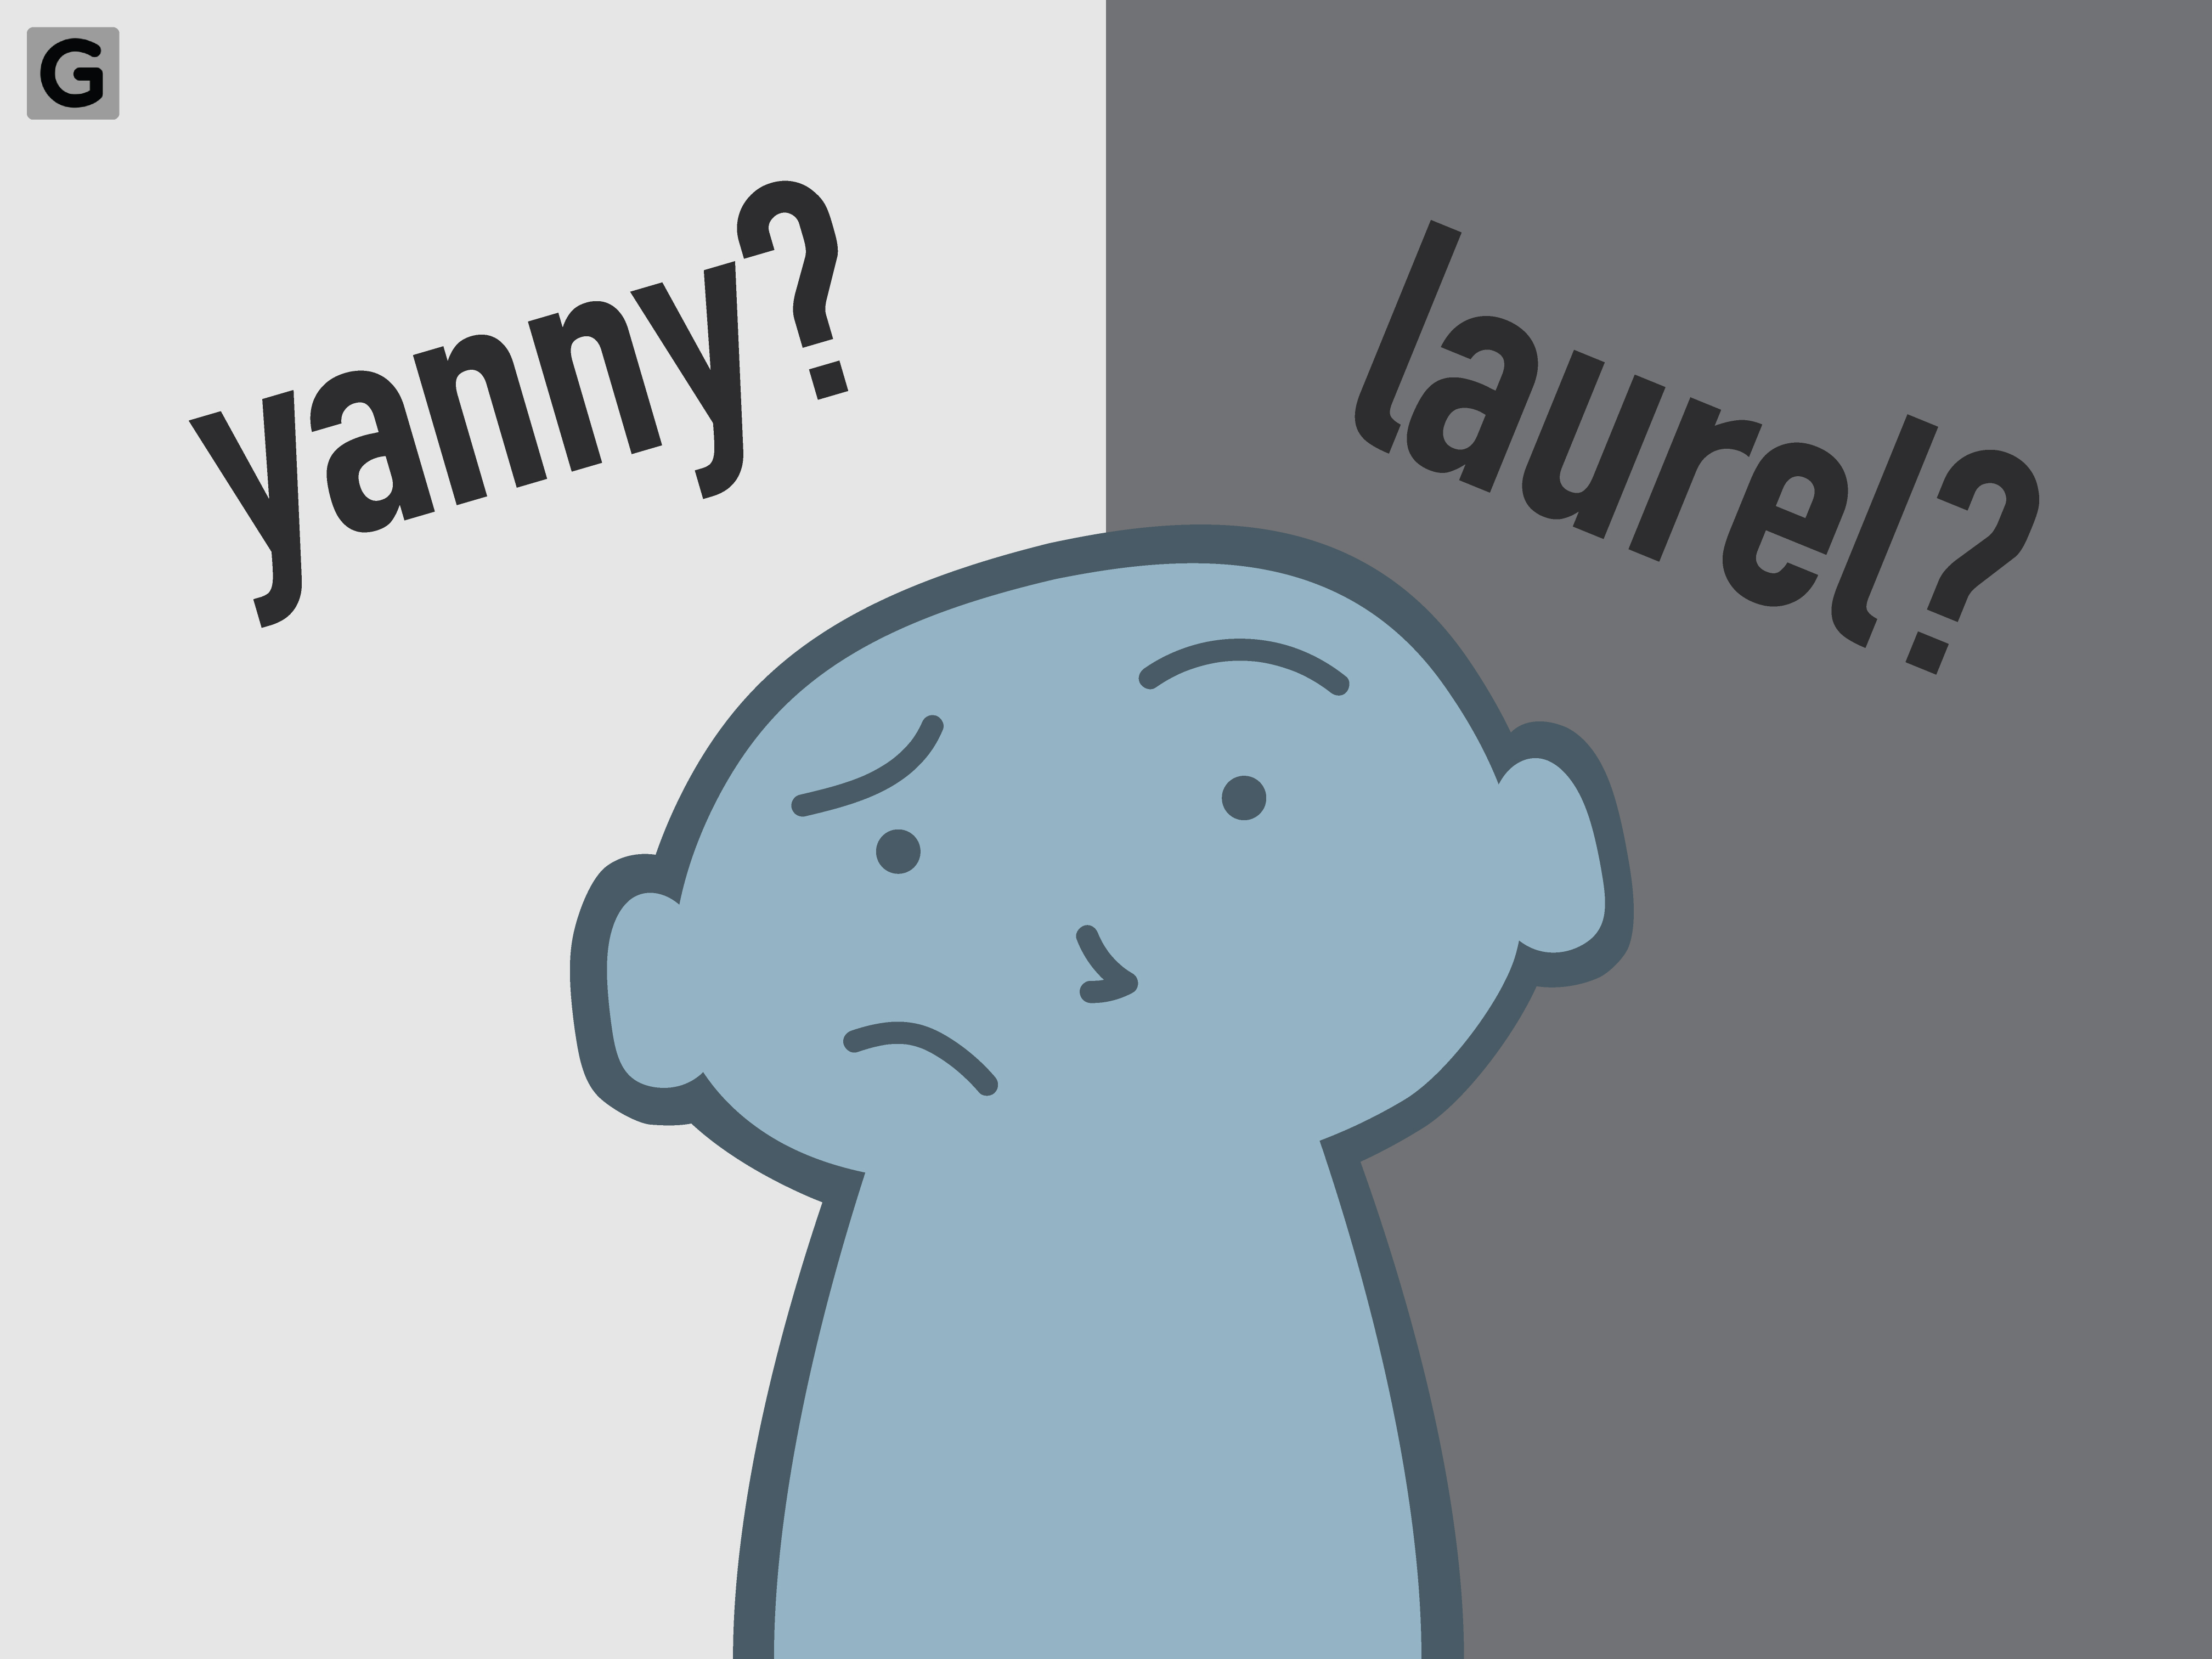 A cartoon figure is thinking about yanny and laurel